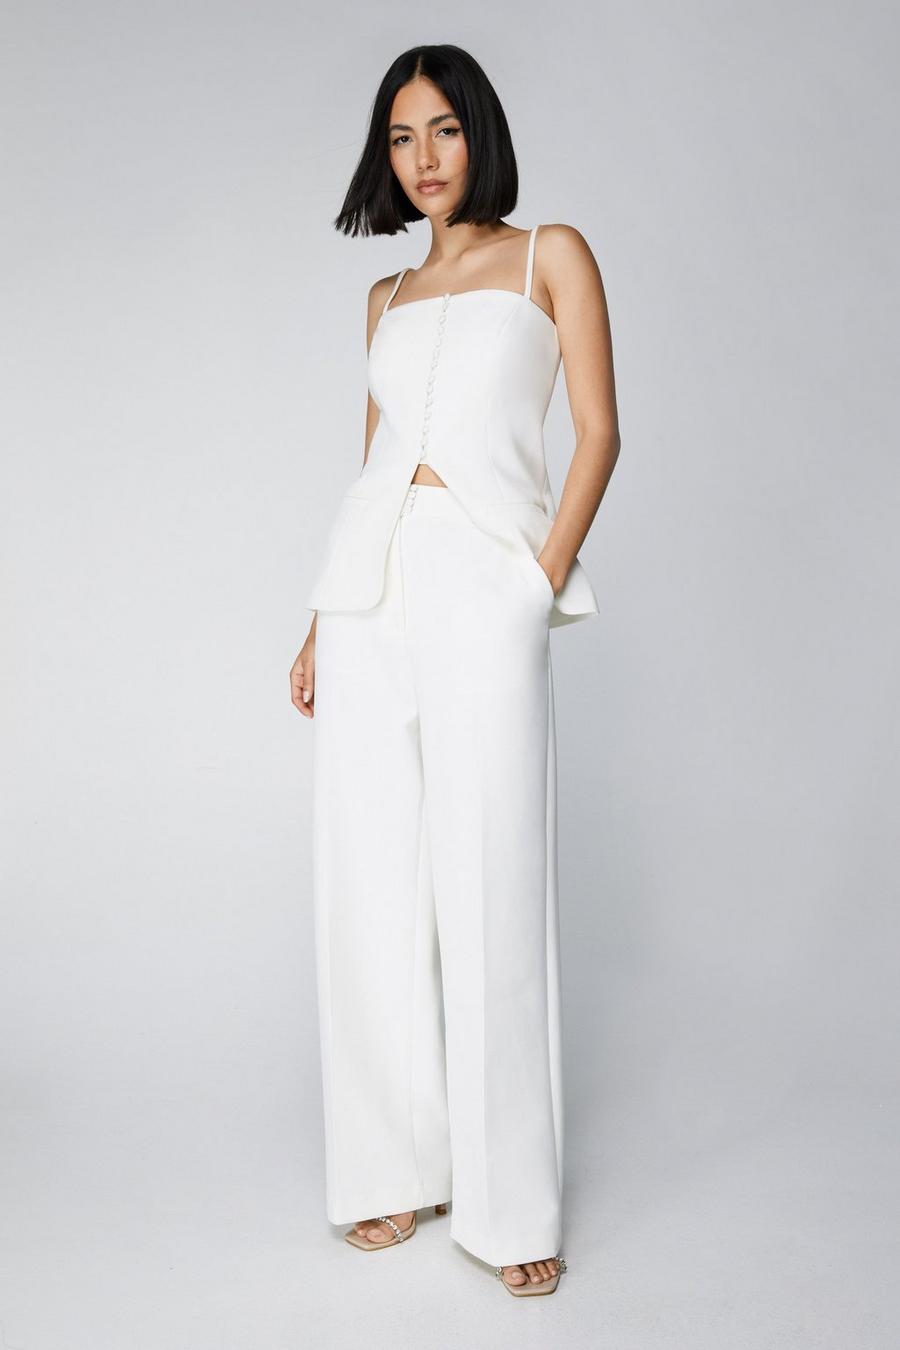 Women's Suits | Women Tailored Pant & Suits | Nasty Gal